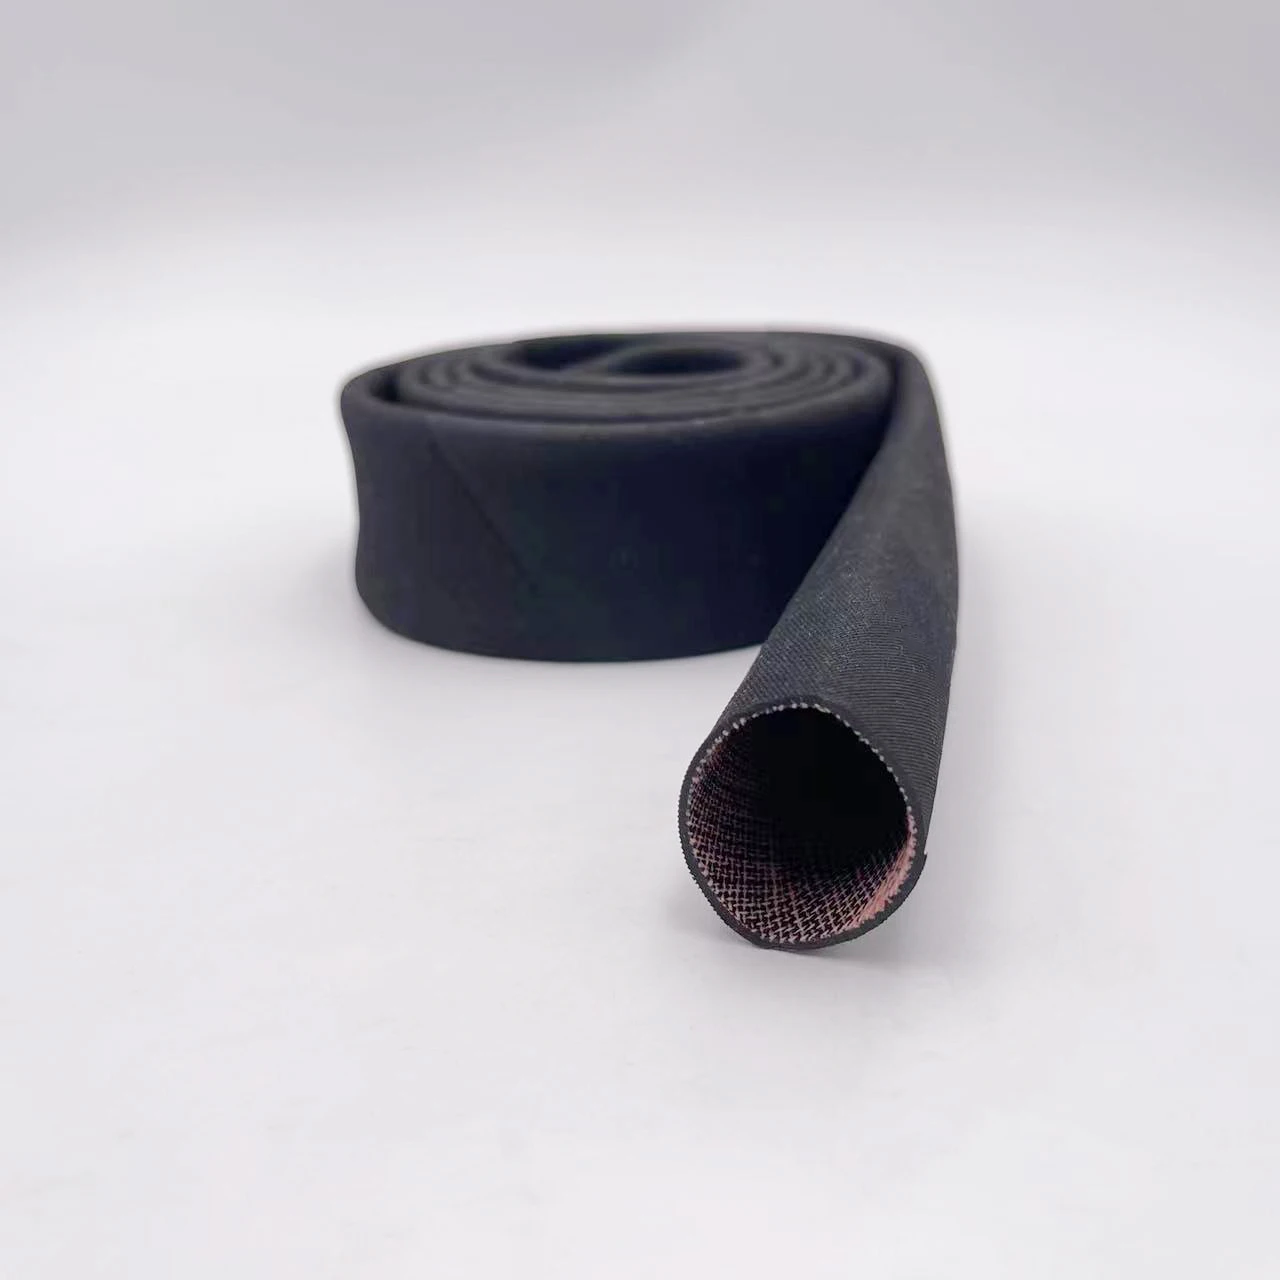 Welding Torch Cloth Cable Rubber Cover 20M for Tig Torch QQ150 WP 9 17 18 26 Plasma Torch PT-31 LG40 P80 25mm Diameter